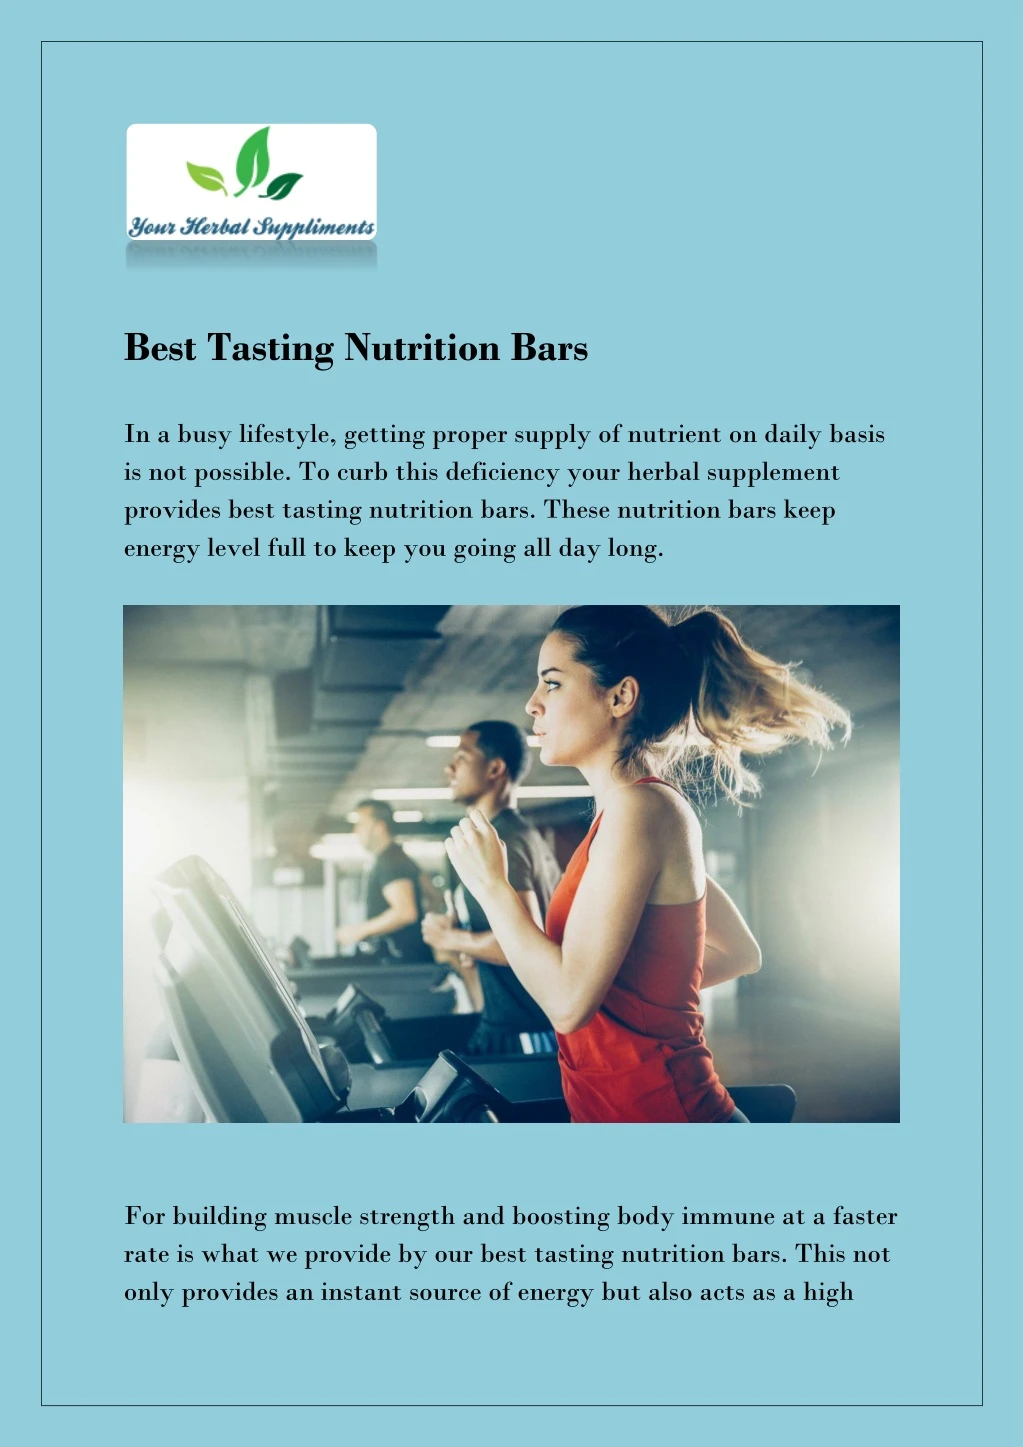 best tasting nutrition bars in a busy lifestyle